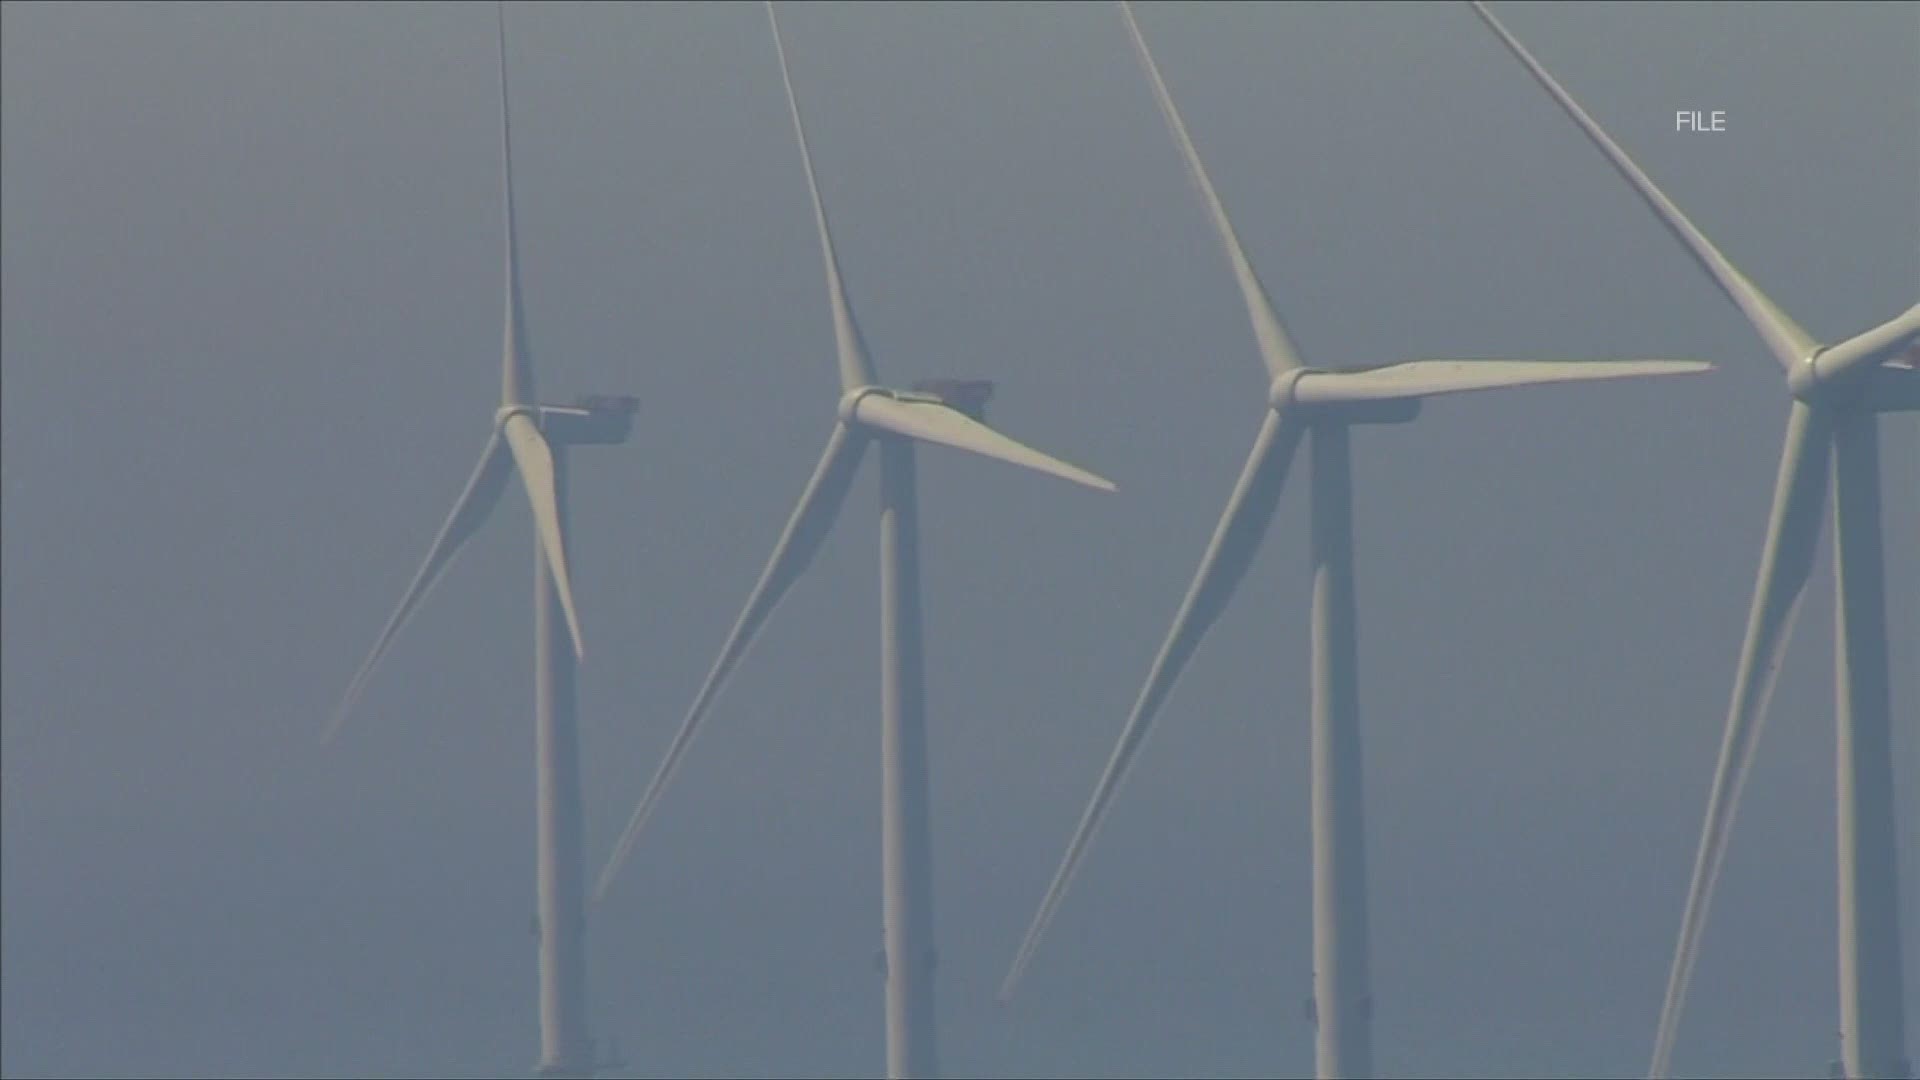 While most fishermen are opposed to adding wind turbines to Maine waters, environmental groups say offshore wind plays a crucial role in fighting climate change.